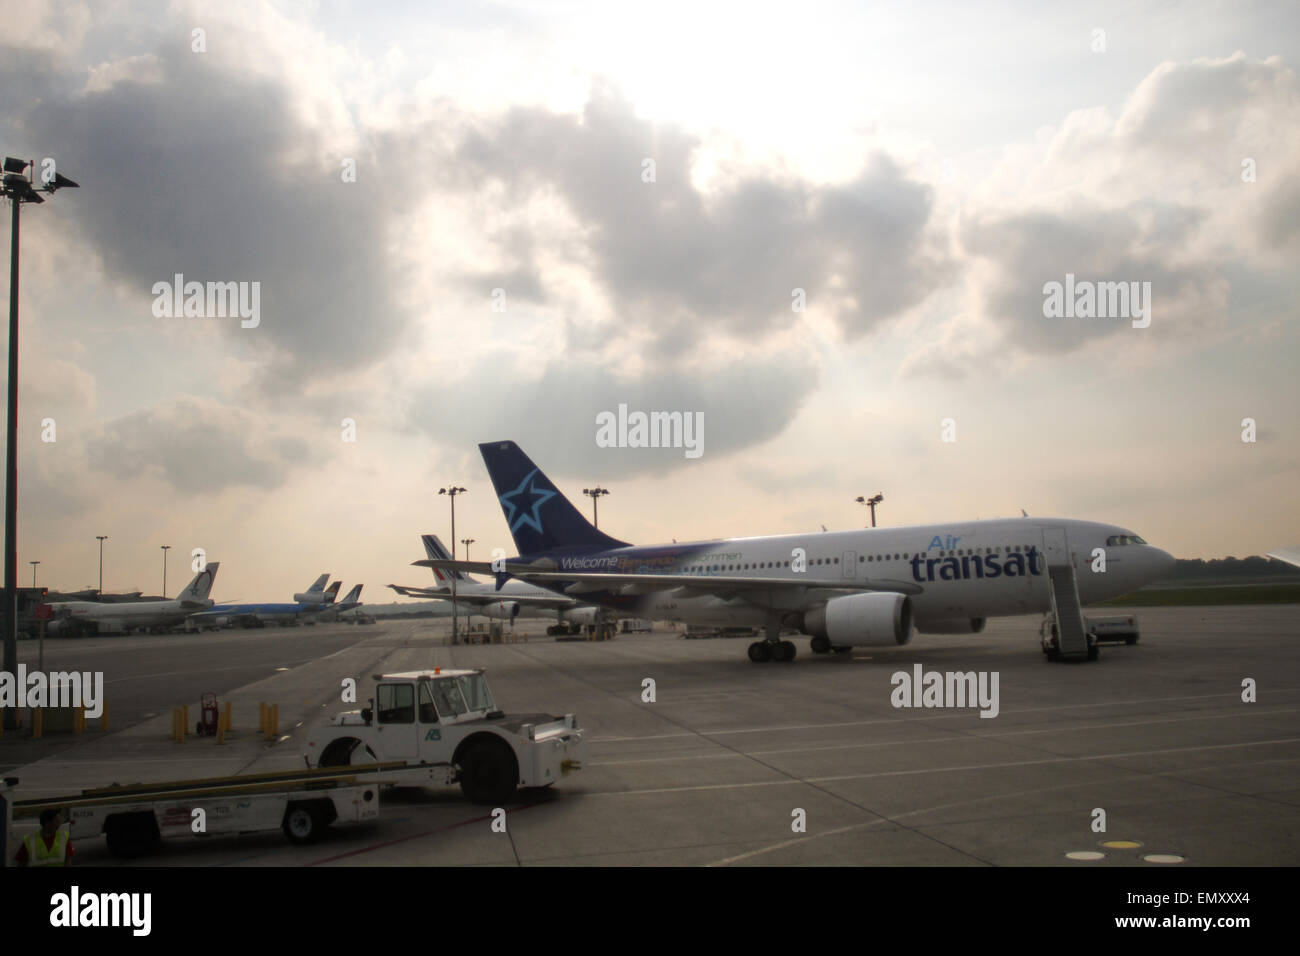 An Air Transat plane on the ground at Pierre Elliott Trudeau International Airport in Montreal, Que. Stock Photo